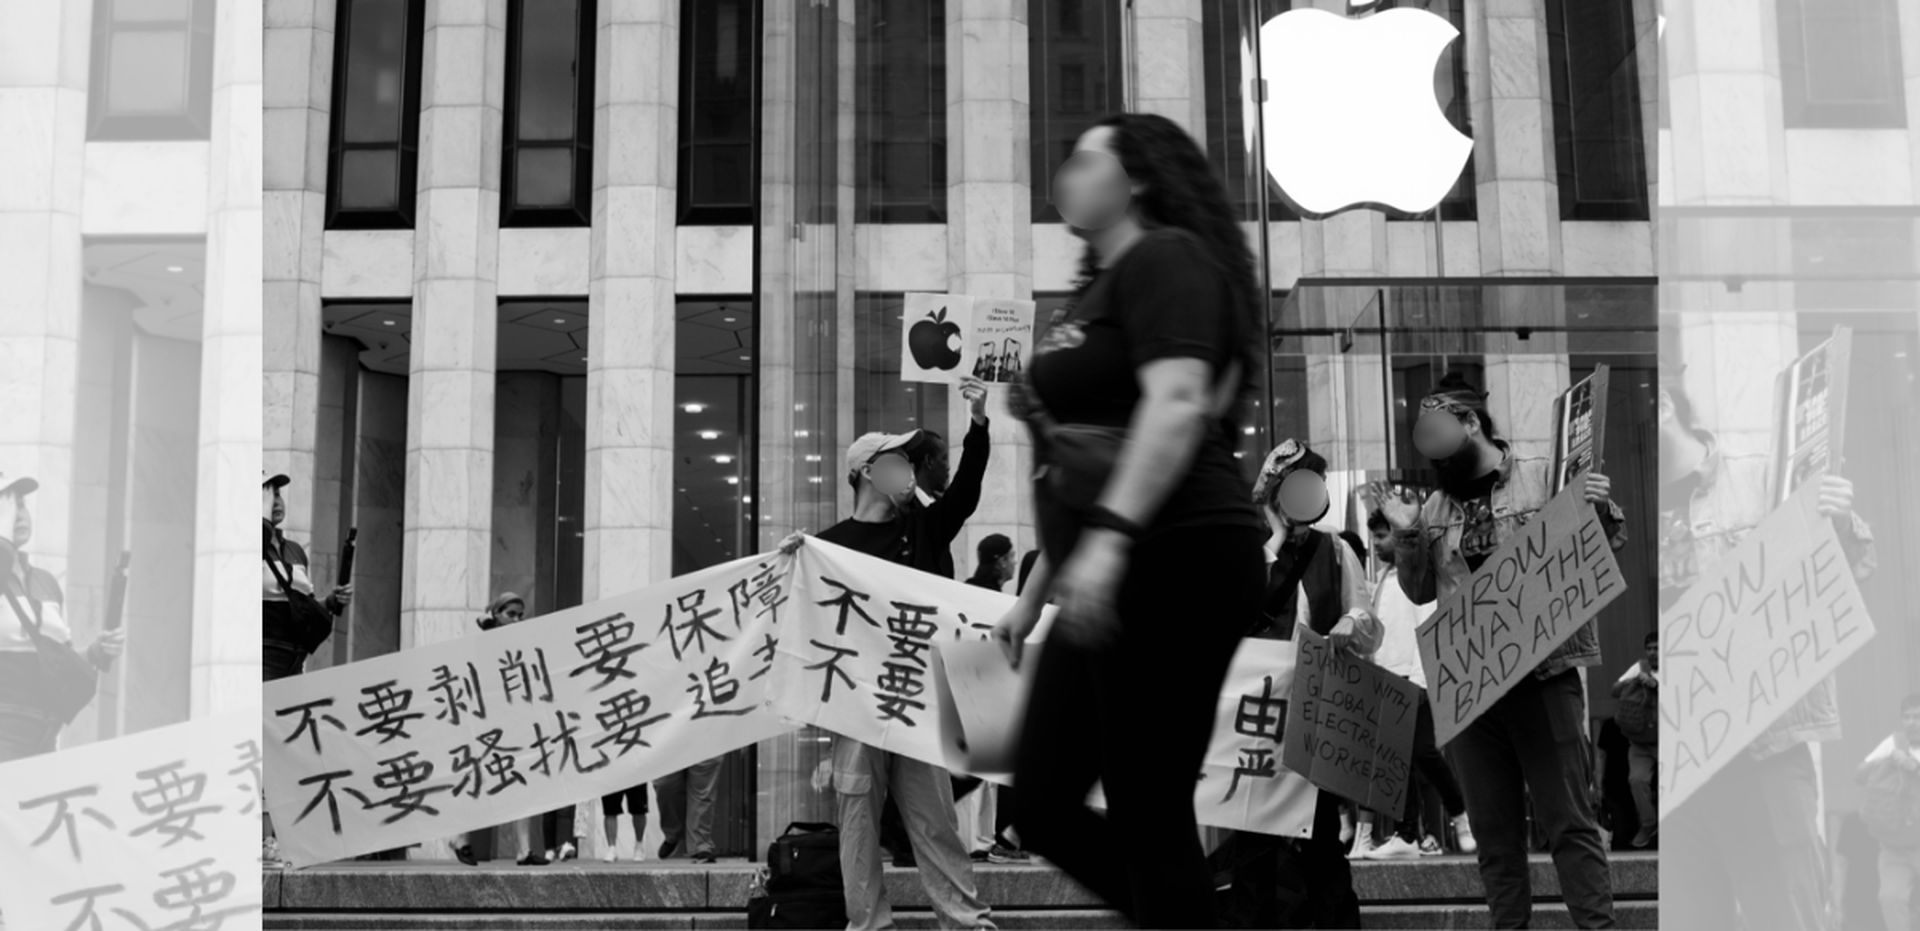 Apple moving out of China: Poor working conditions in China factory led to protests